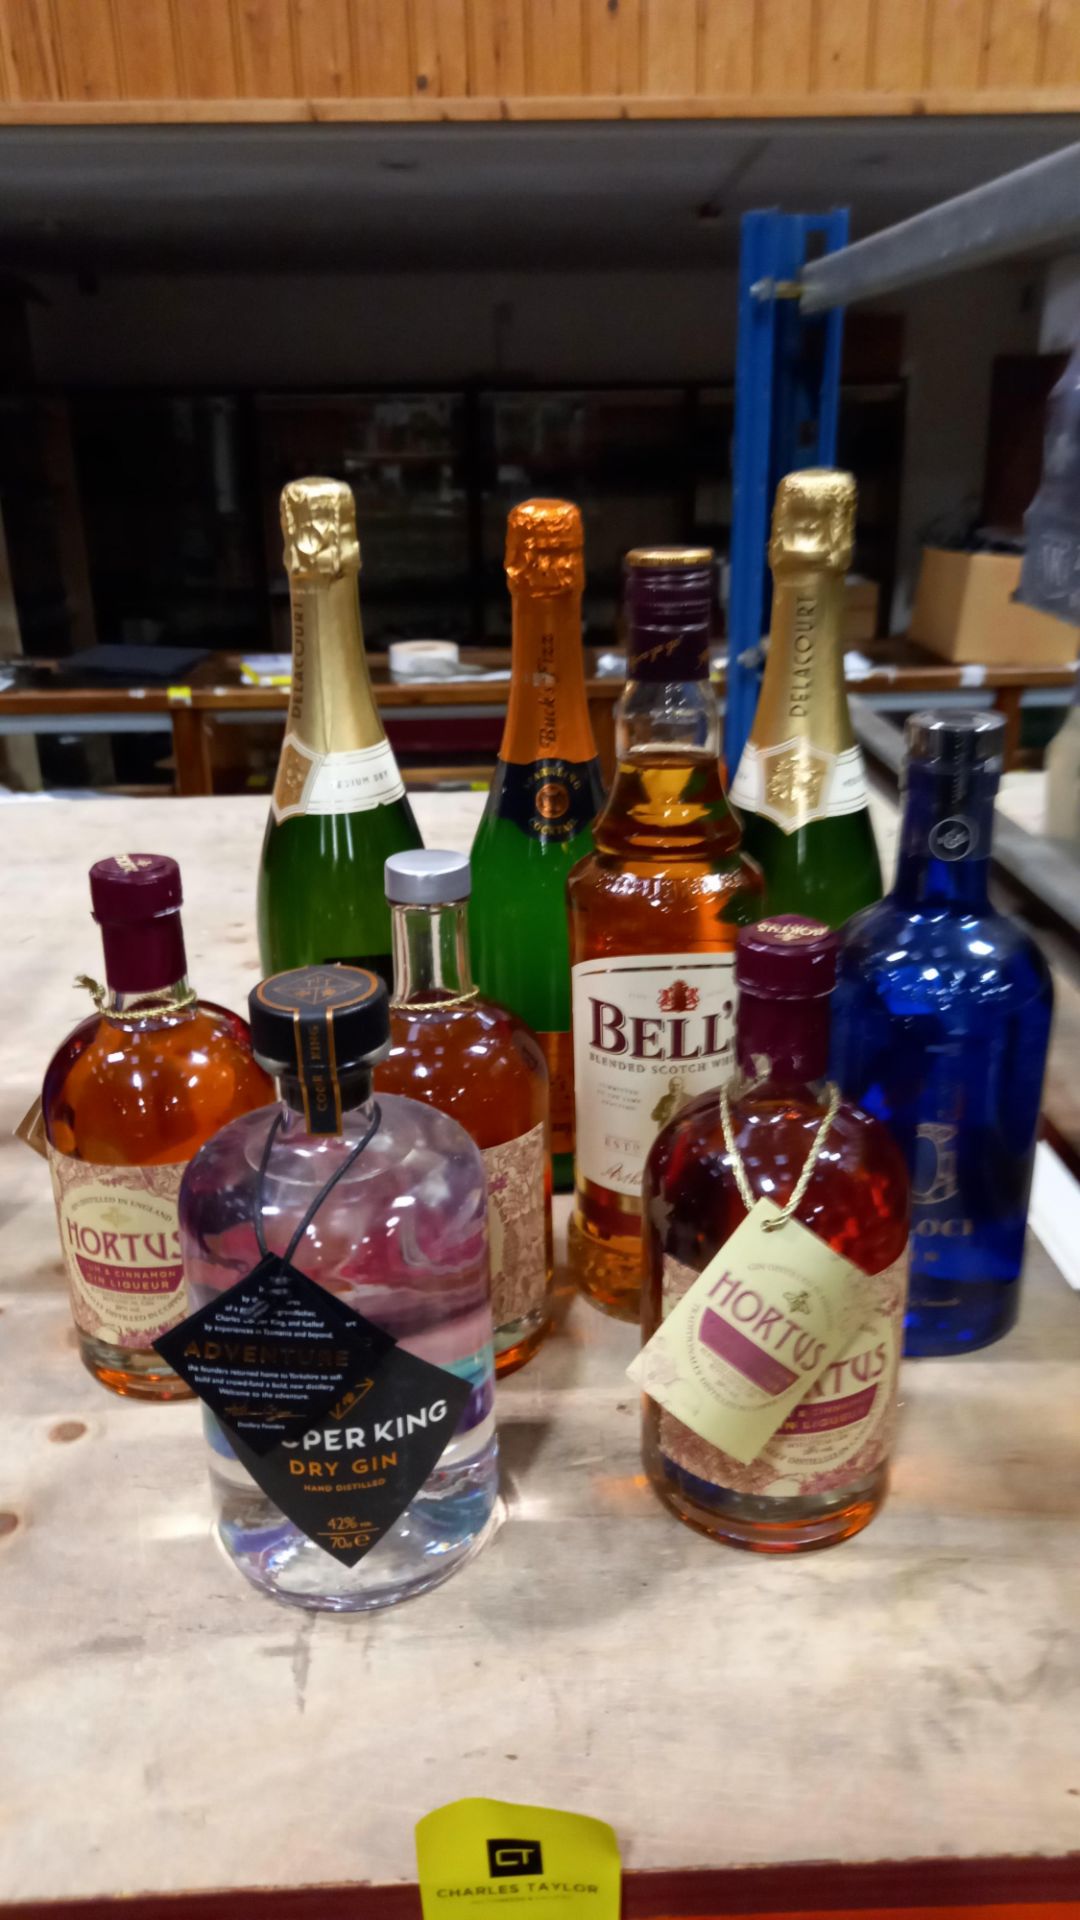 9 X BOTTLES OF ALCOHOL IE. 2 X DELACOURT CHAMPAGNE, 1 X BELLS WHISKY 70CL, 3 X HORTUS GIN 50CL, 1